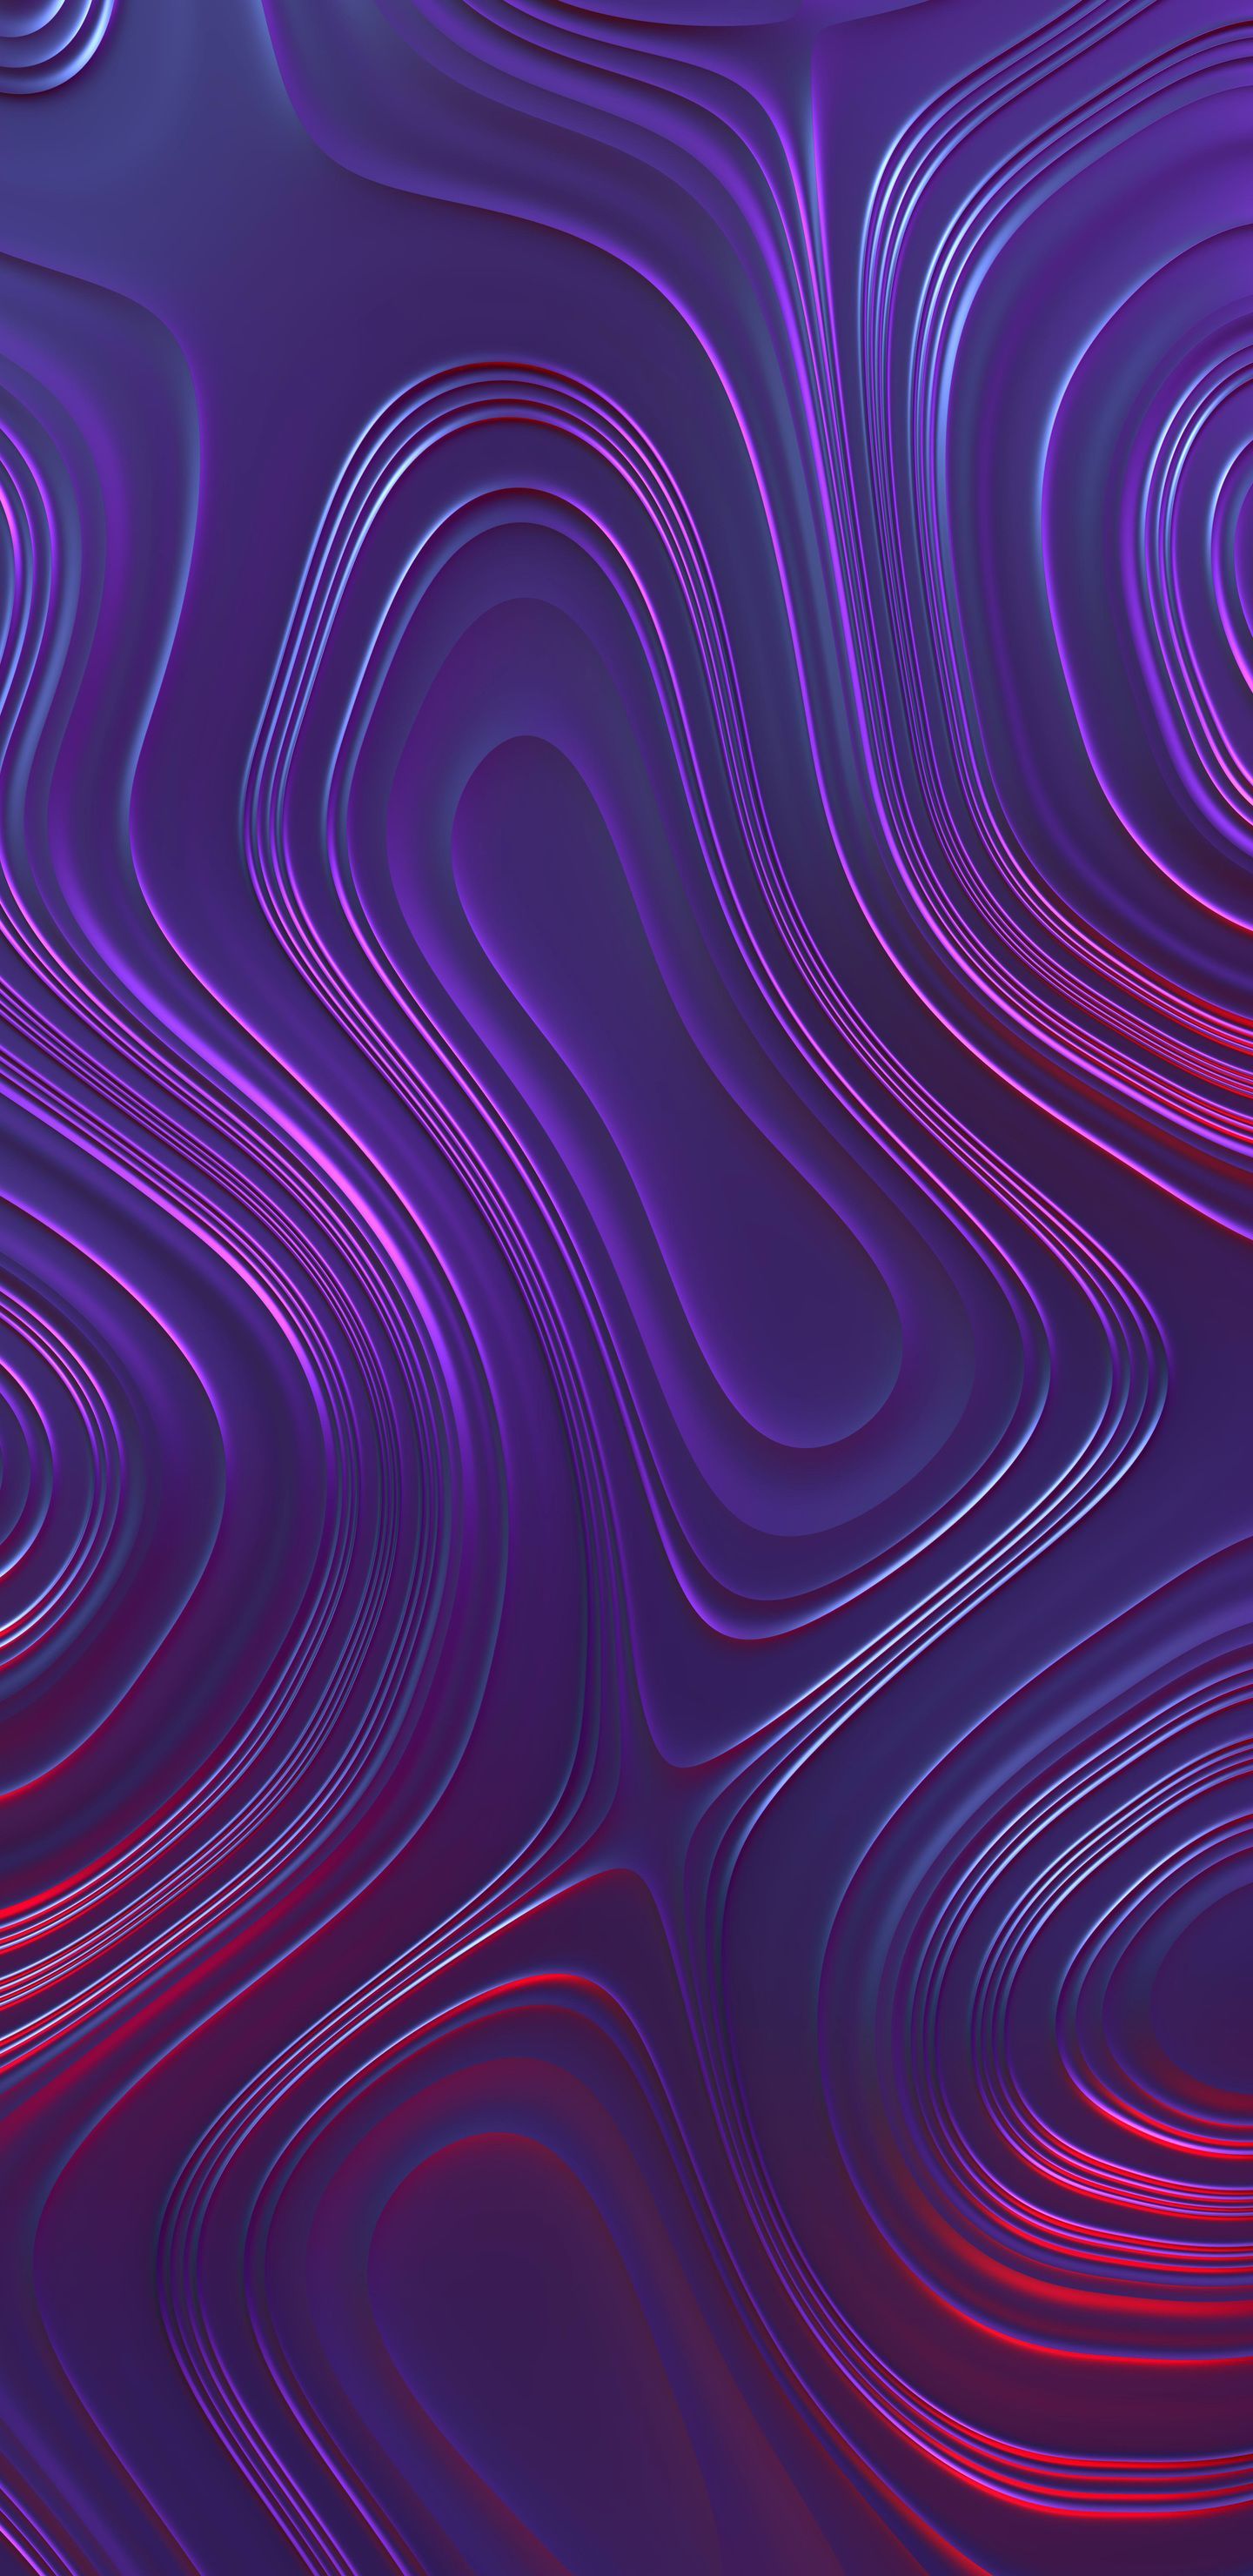 Abstract Ultra HD 5k In 1440x2960 Resolution. Abstract iphone wallpaper, Abstract wallpaper, iPhone wallpaper image